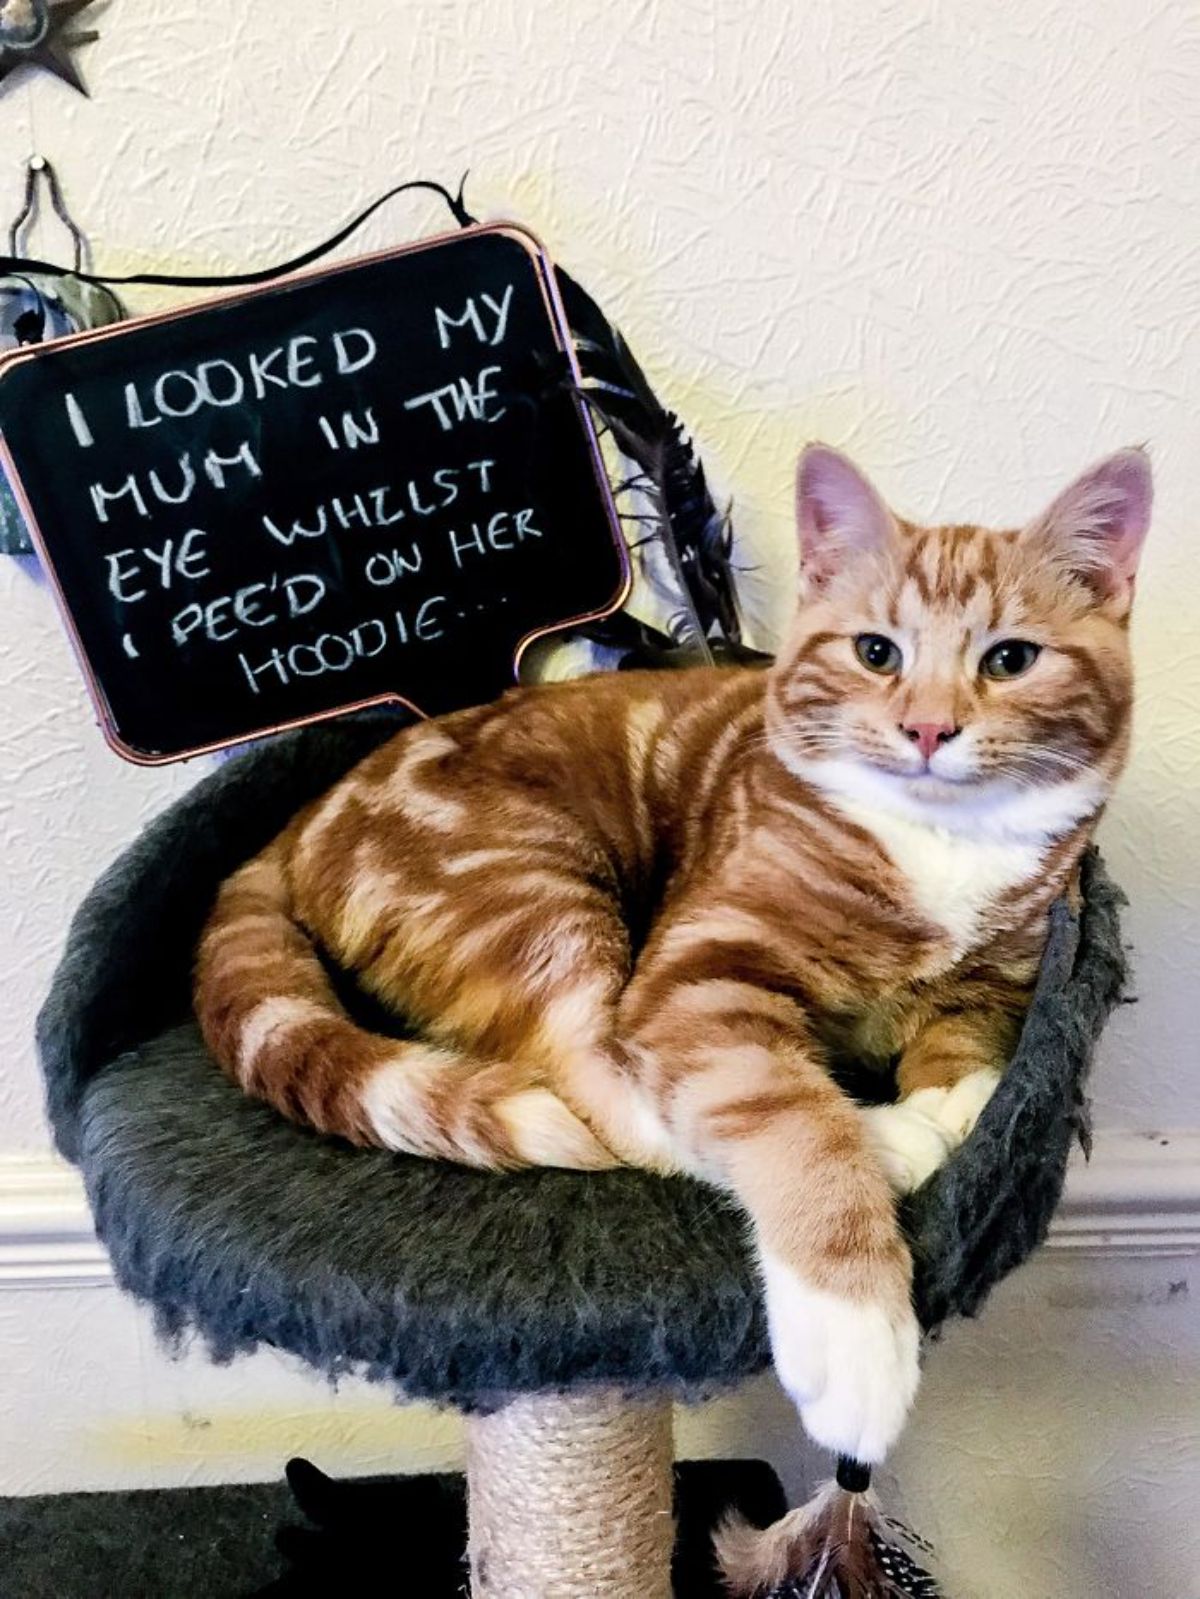 orange and white cat laying in a black cat perch of a cat tree with a note saying "I looked my mum in the eye whilst I pee'd on her hoodie"